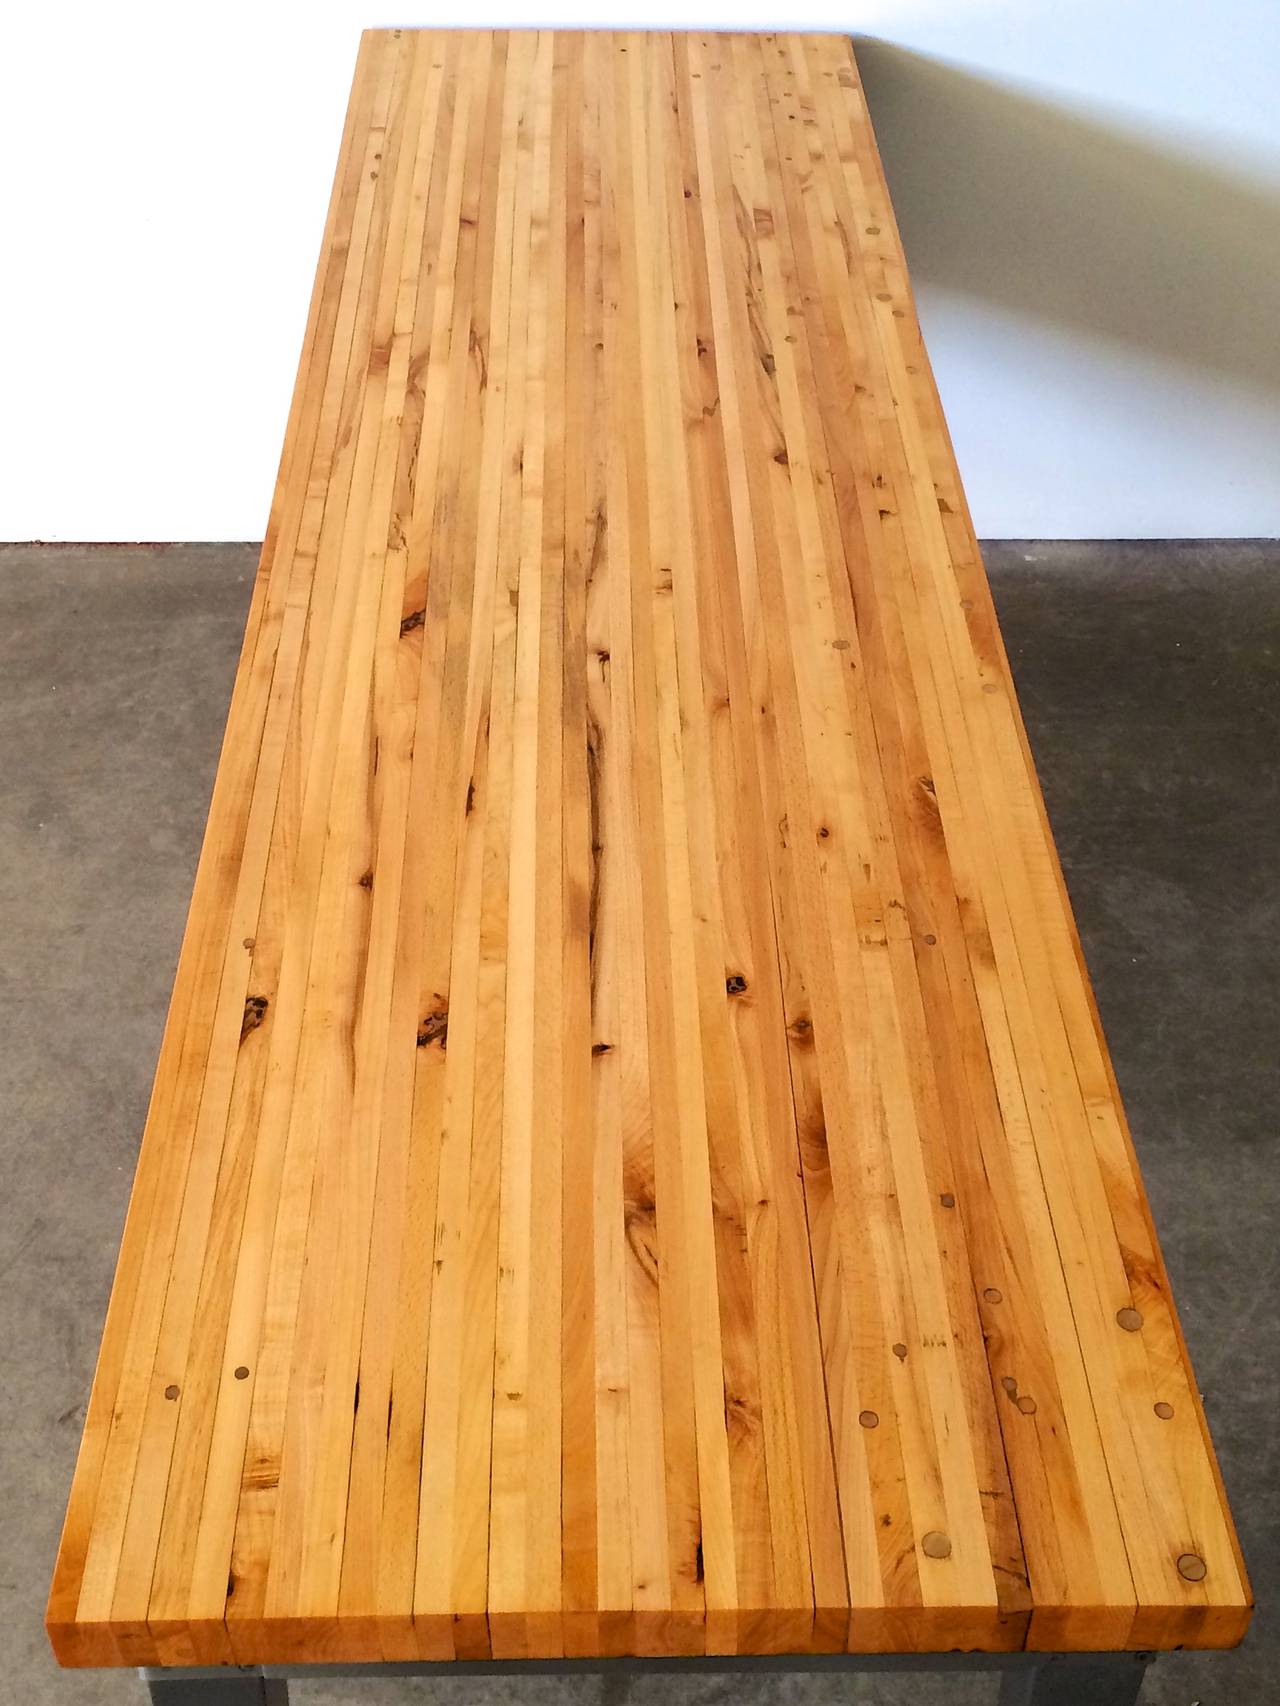 Vintage Industrial Butcher Block Table In Excellent Condition For Sale In Minneapolis, MN